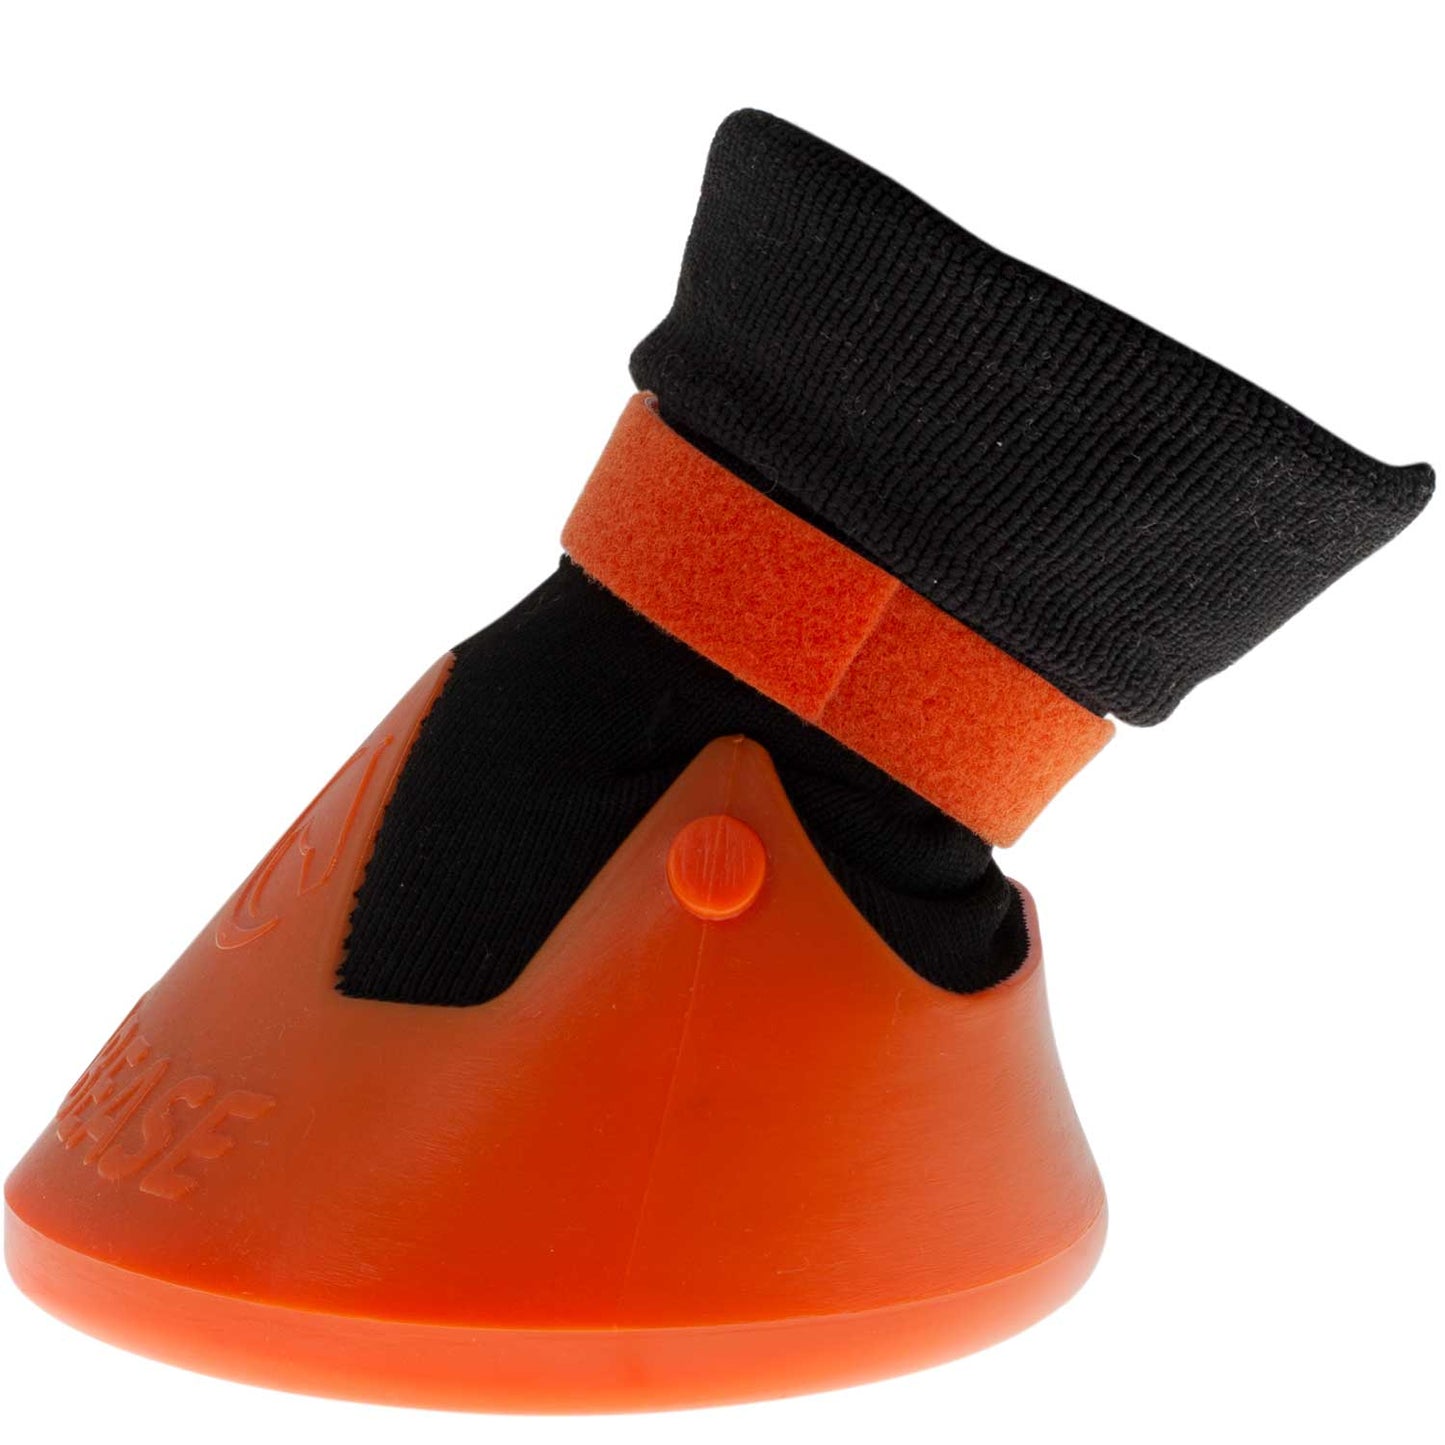 Orange conical sports cone with black elastic strap on top.